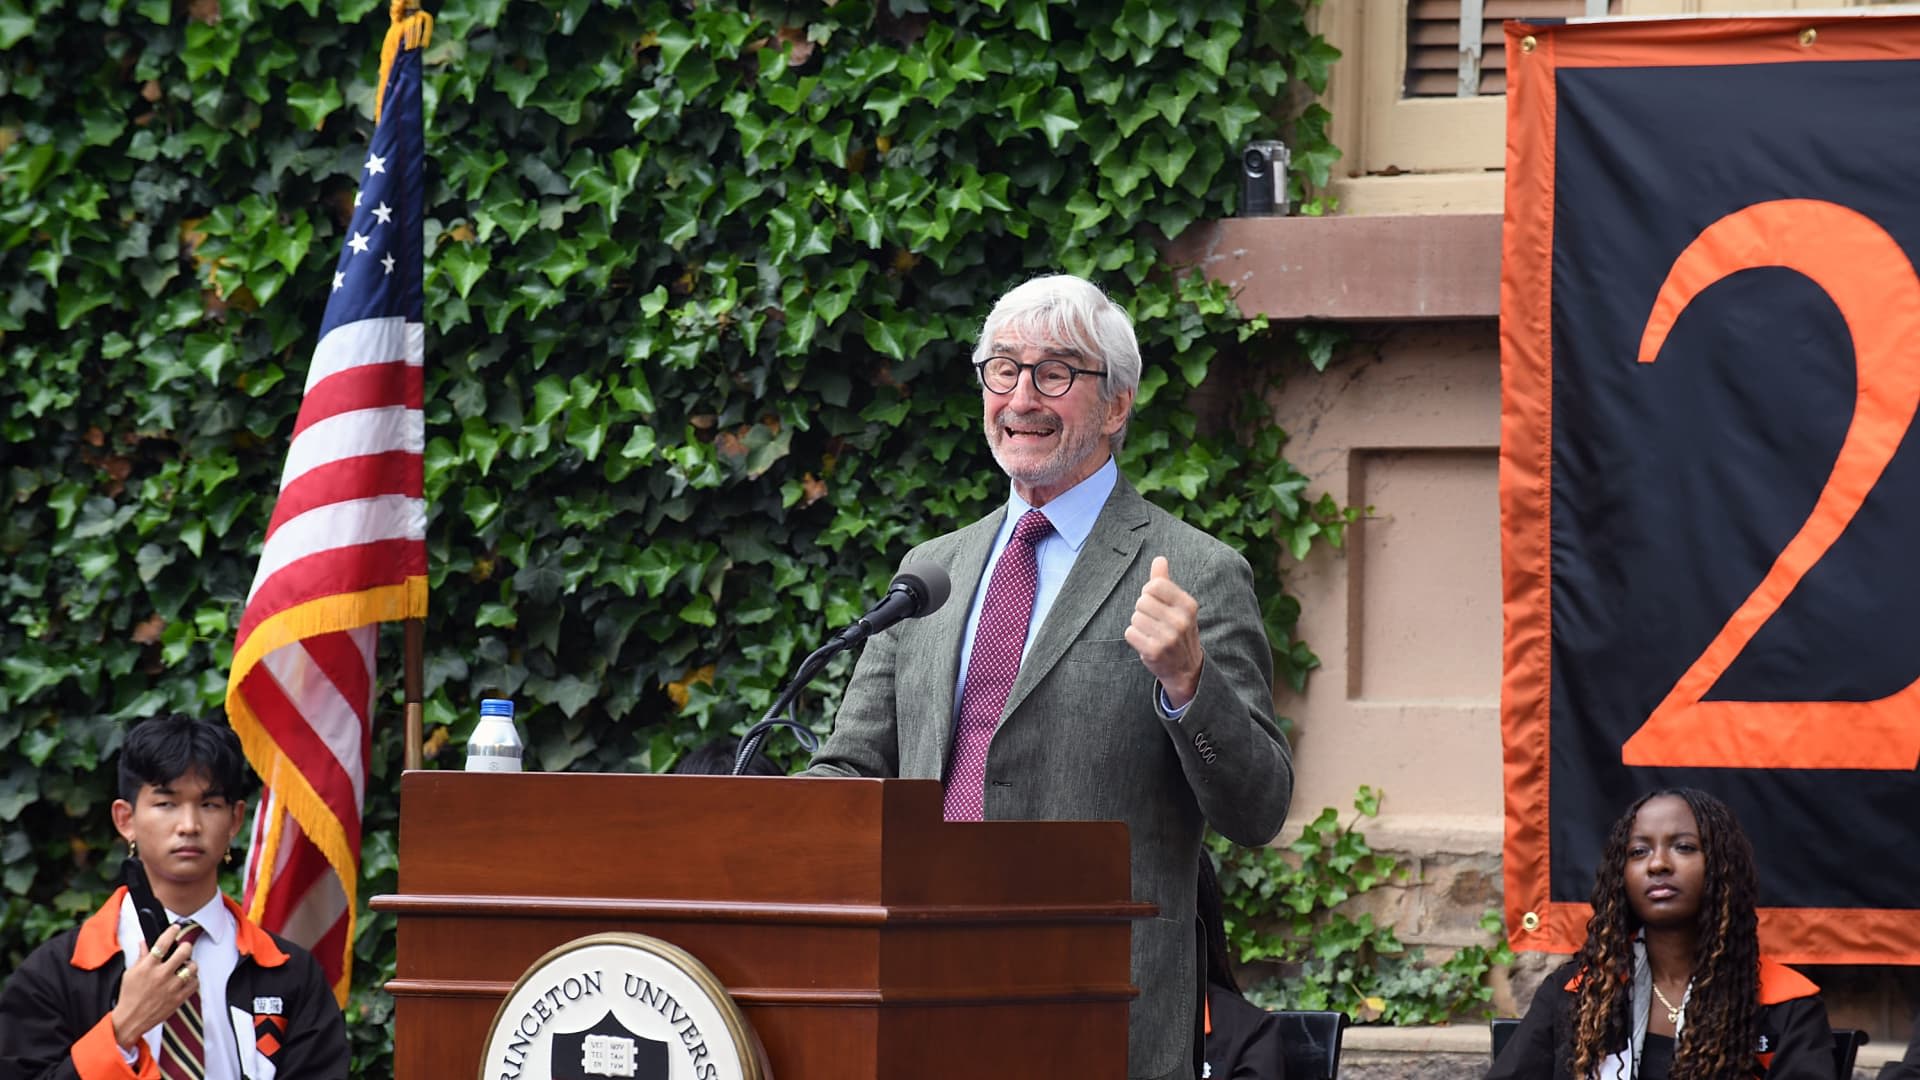 'Law & Order' actor Sam Waterston: What quitting my job after nearly 20 years taught me about happiness